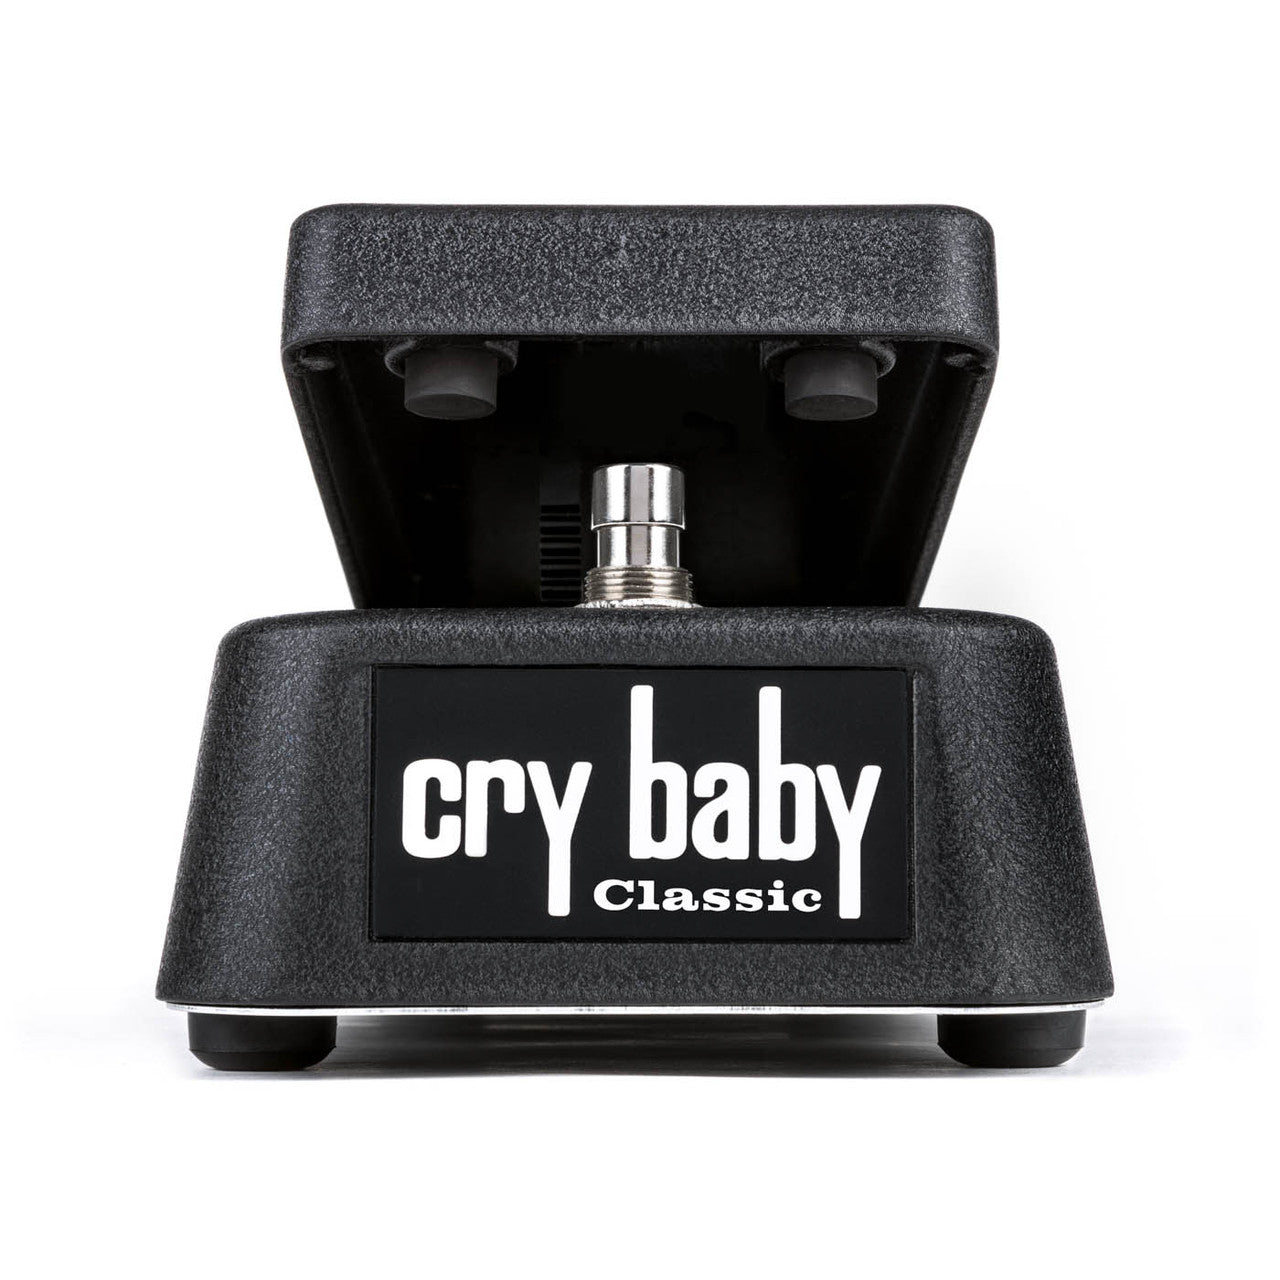 Dunlop Cry Baby Classic Wah Pedal W/ Italian-Made Fasel Inductors